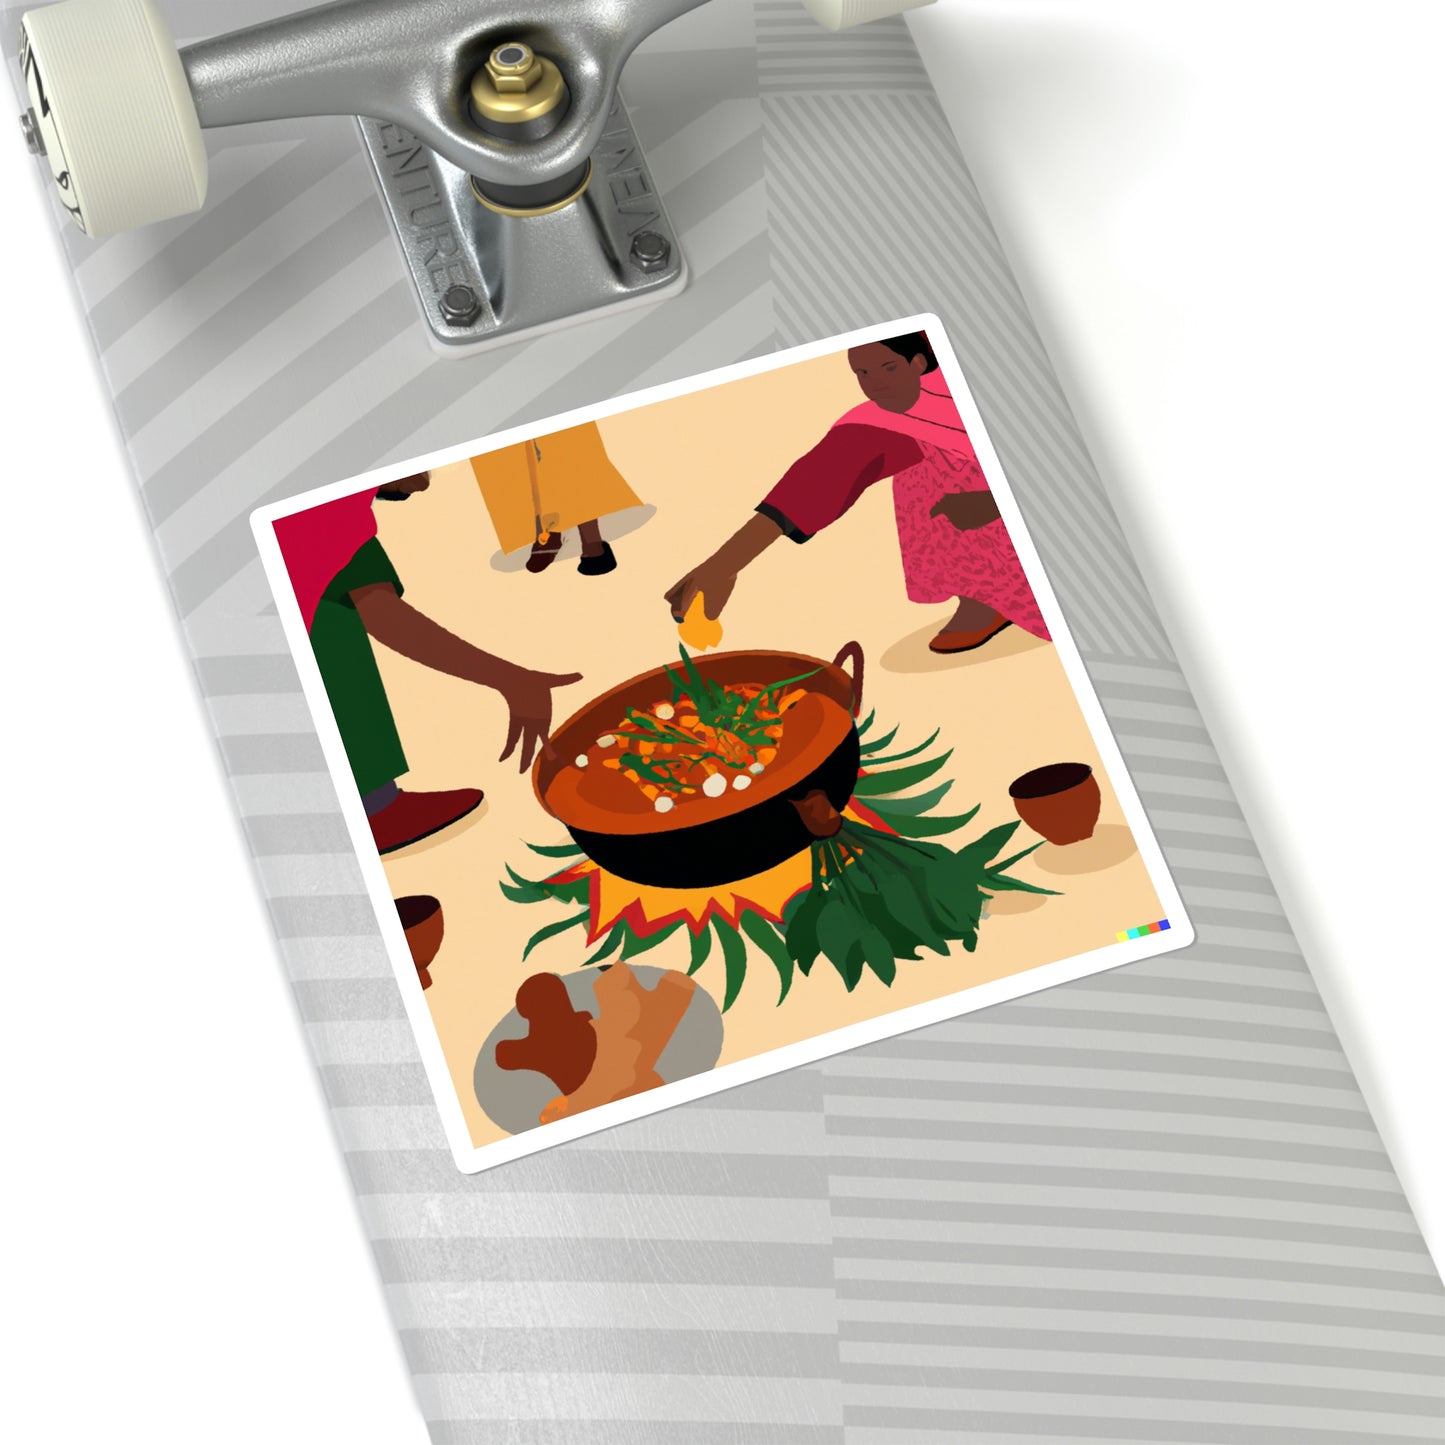 Square Stickers - Family Cooking